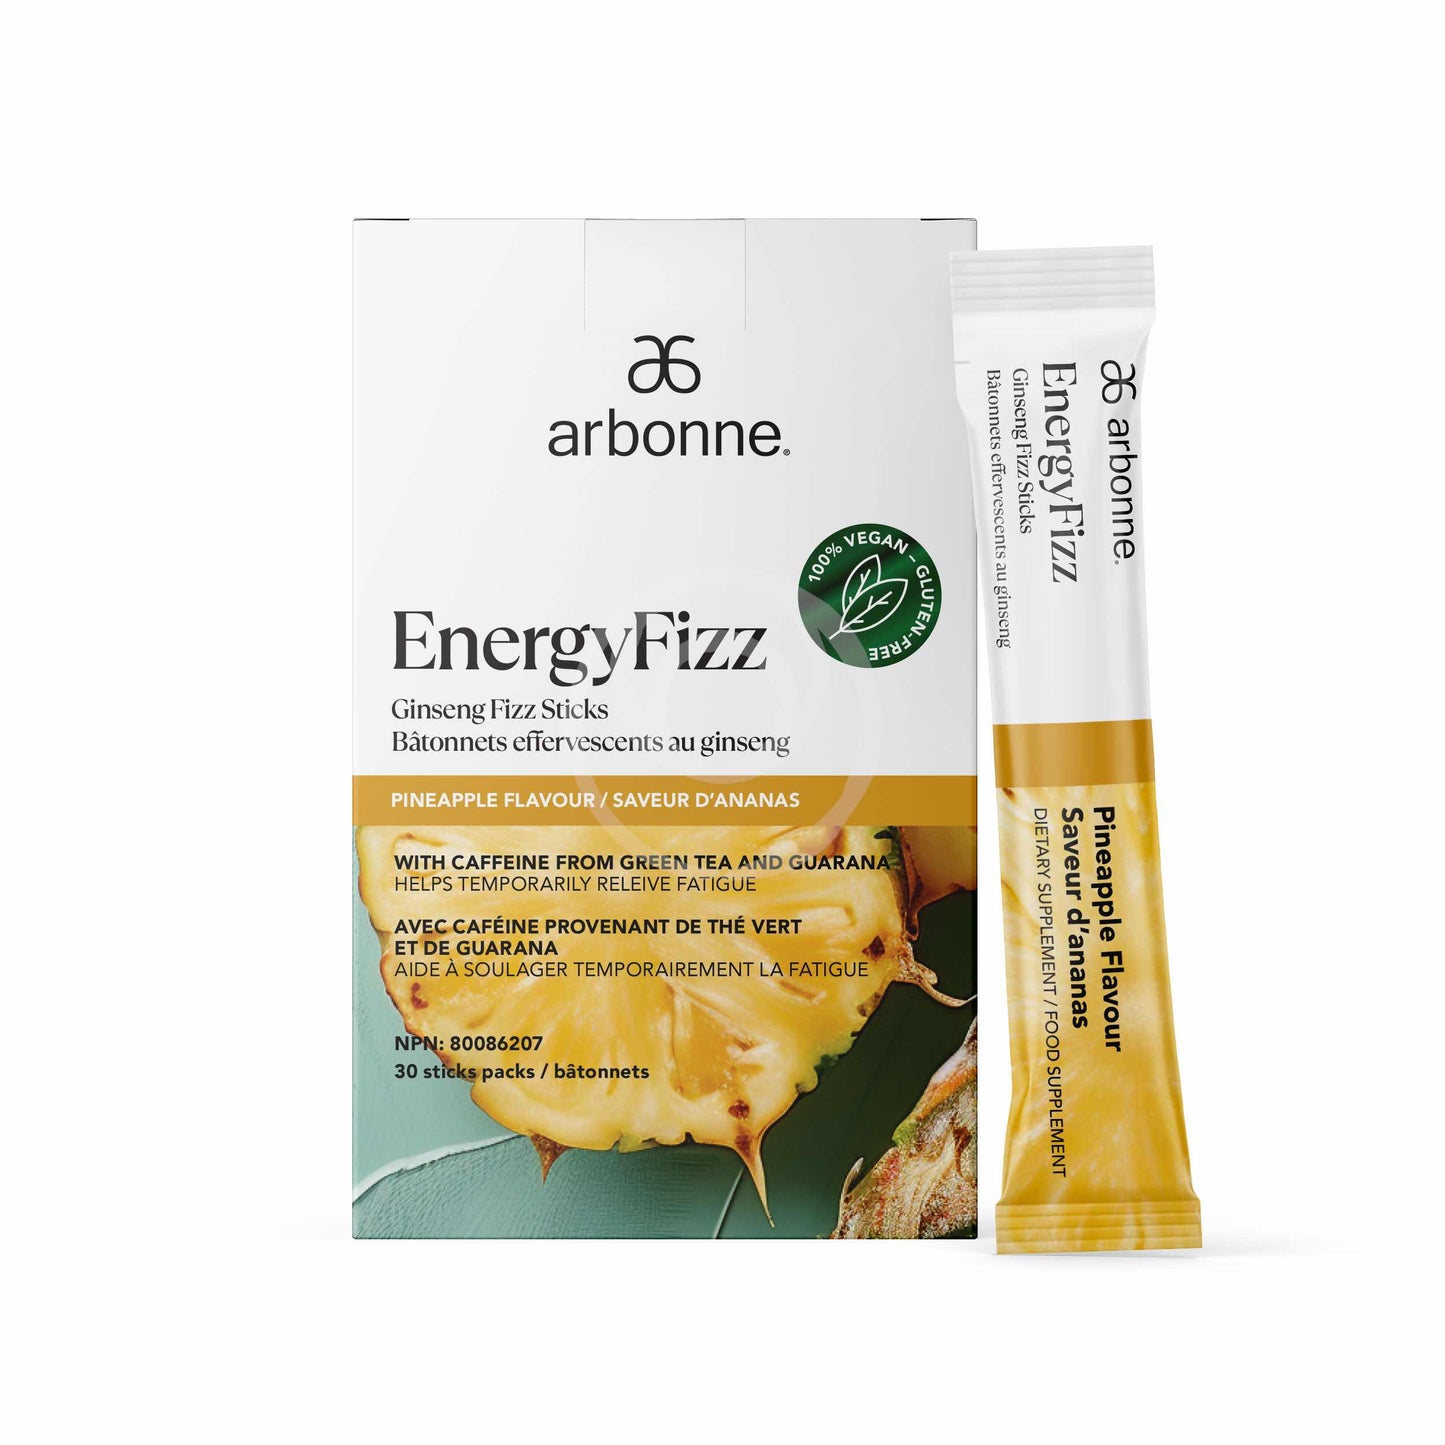 Arbonne EnergyFizz Ginseng Fizz Sticks in Pineapple Flavor, vegan-certified with caffeine from green tea and guarana, featuring white and green packaging.